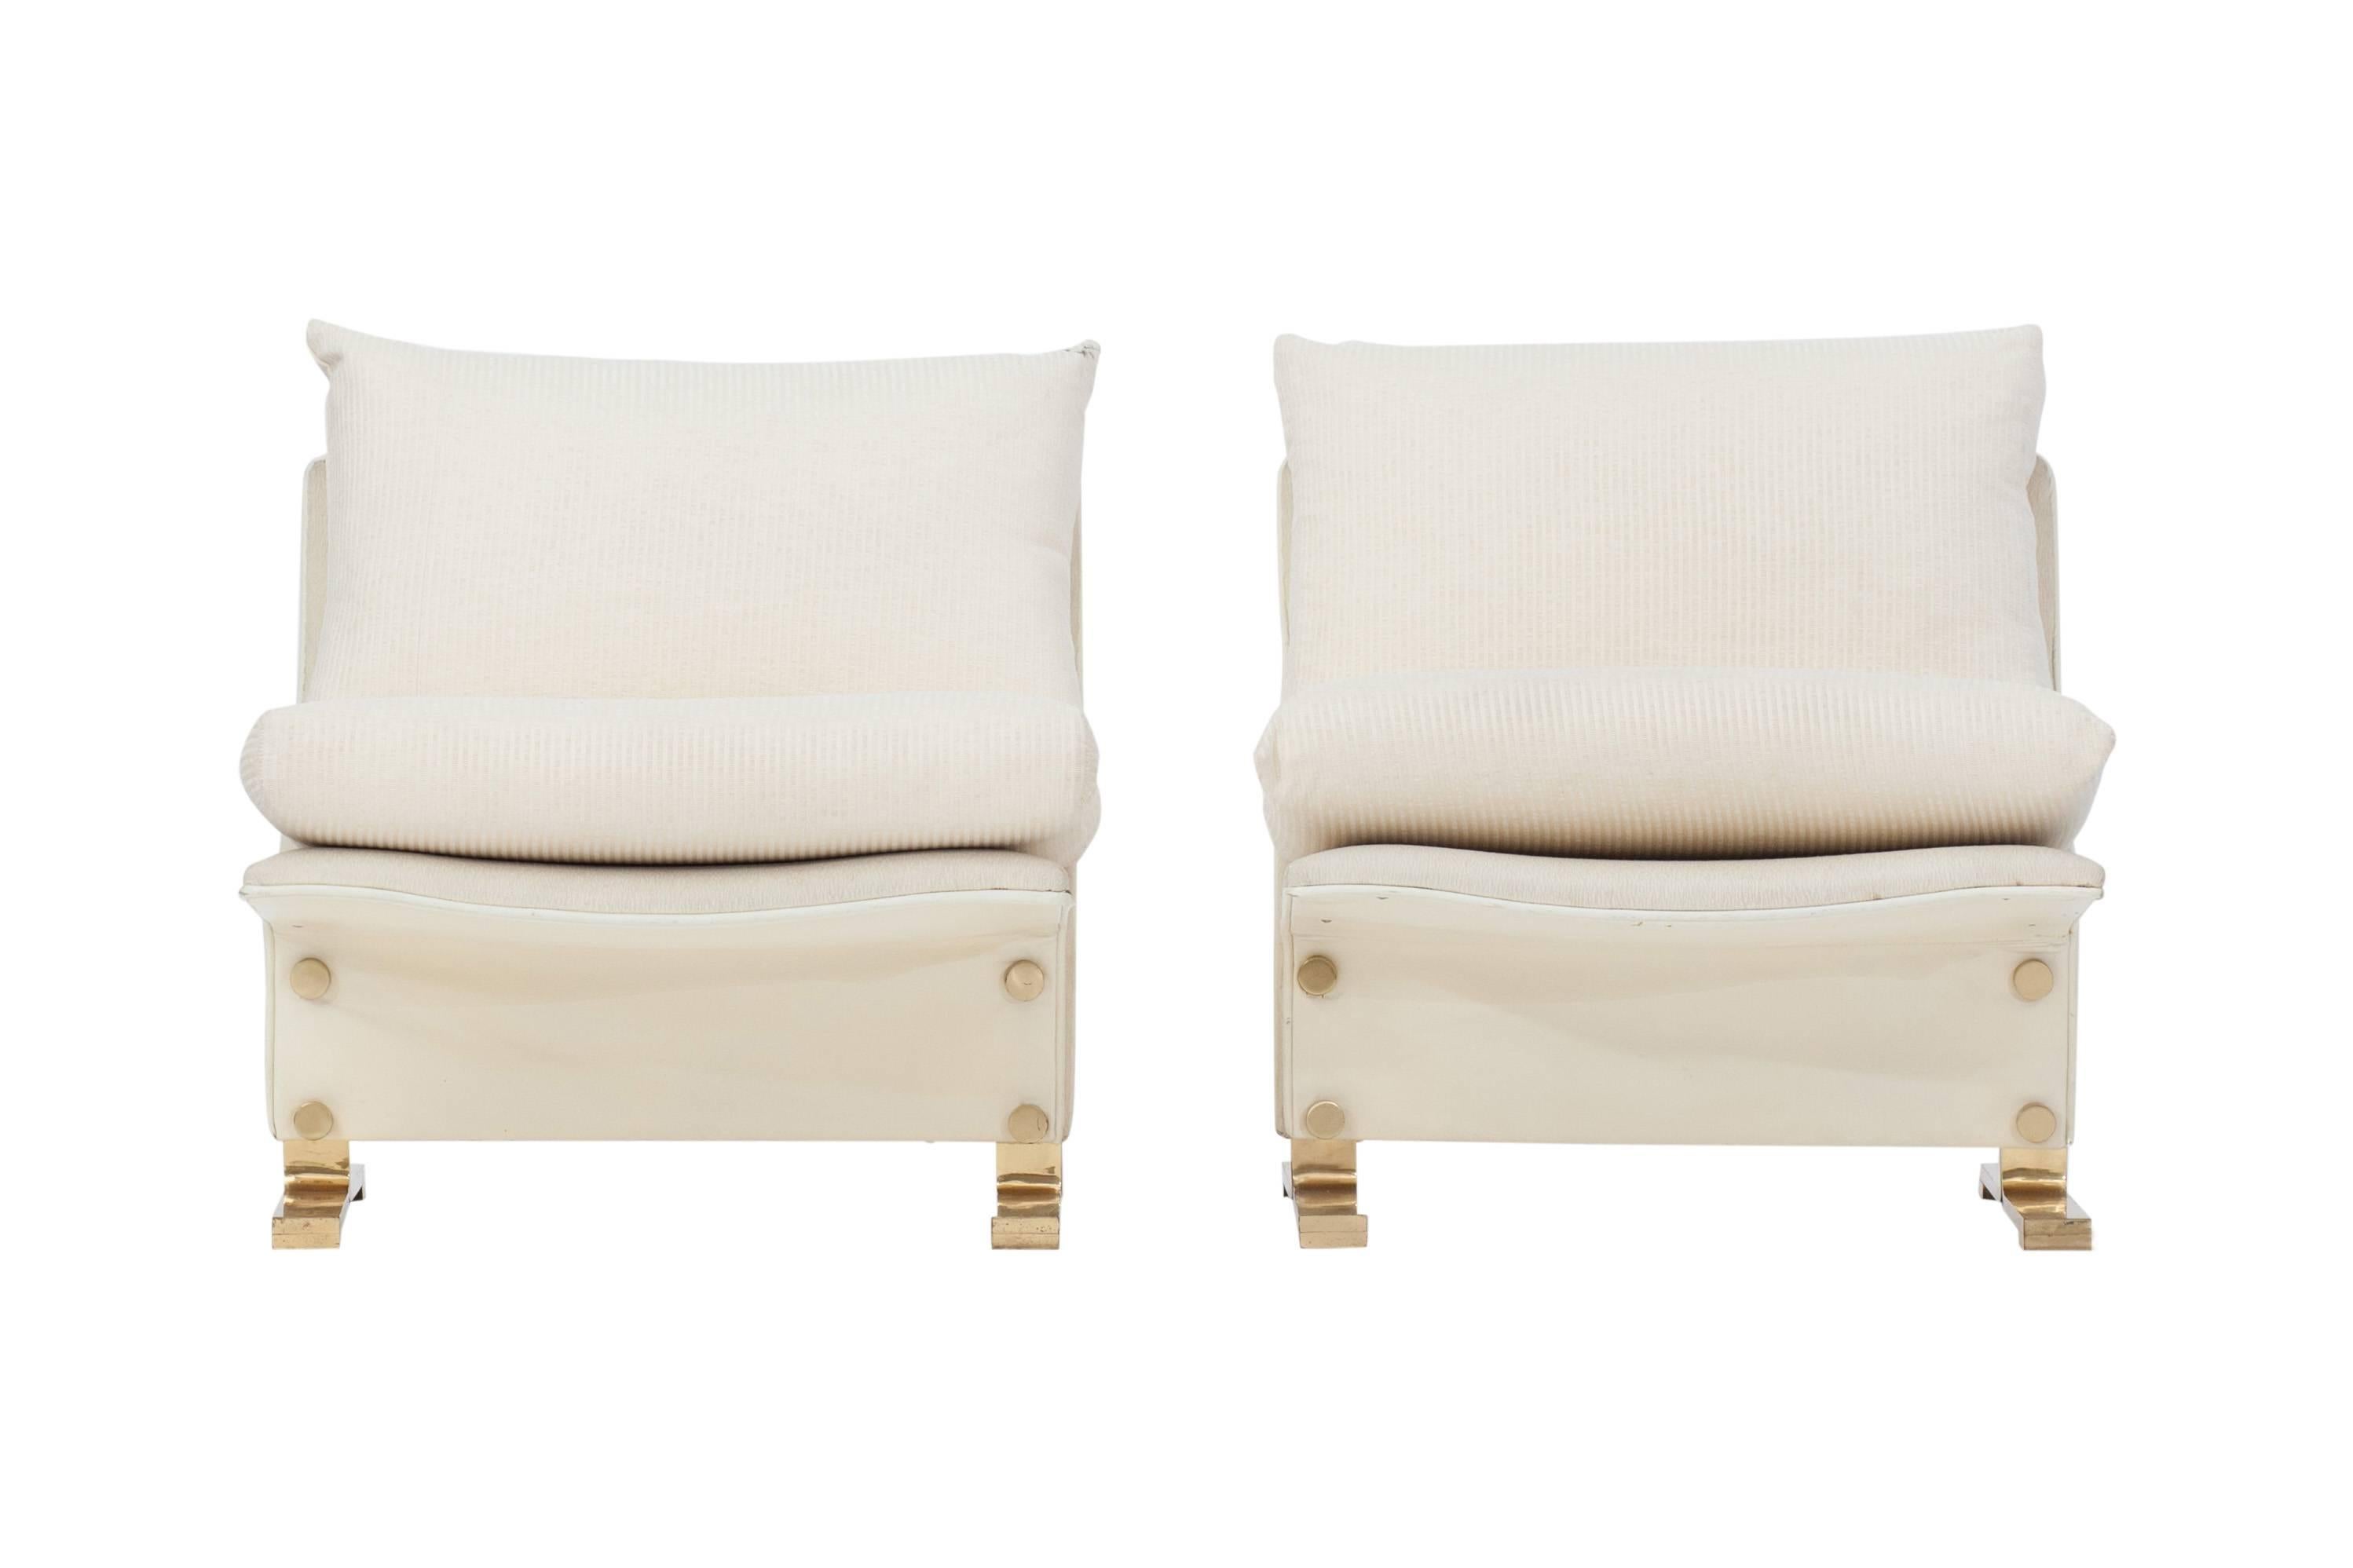 Late 20th Century Marzio Cecchi Pair of Lounge chairs Italy, 1960s